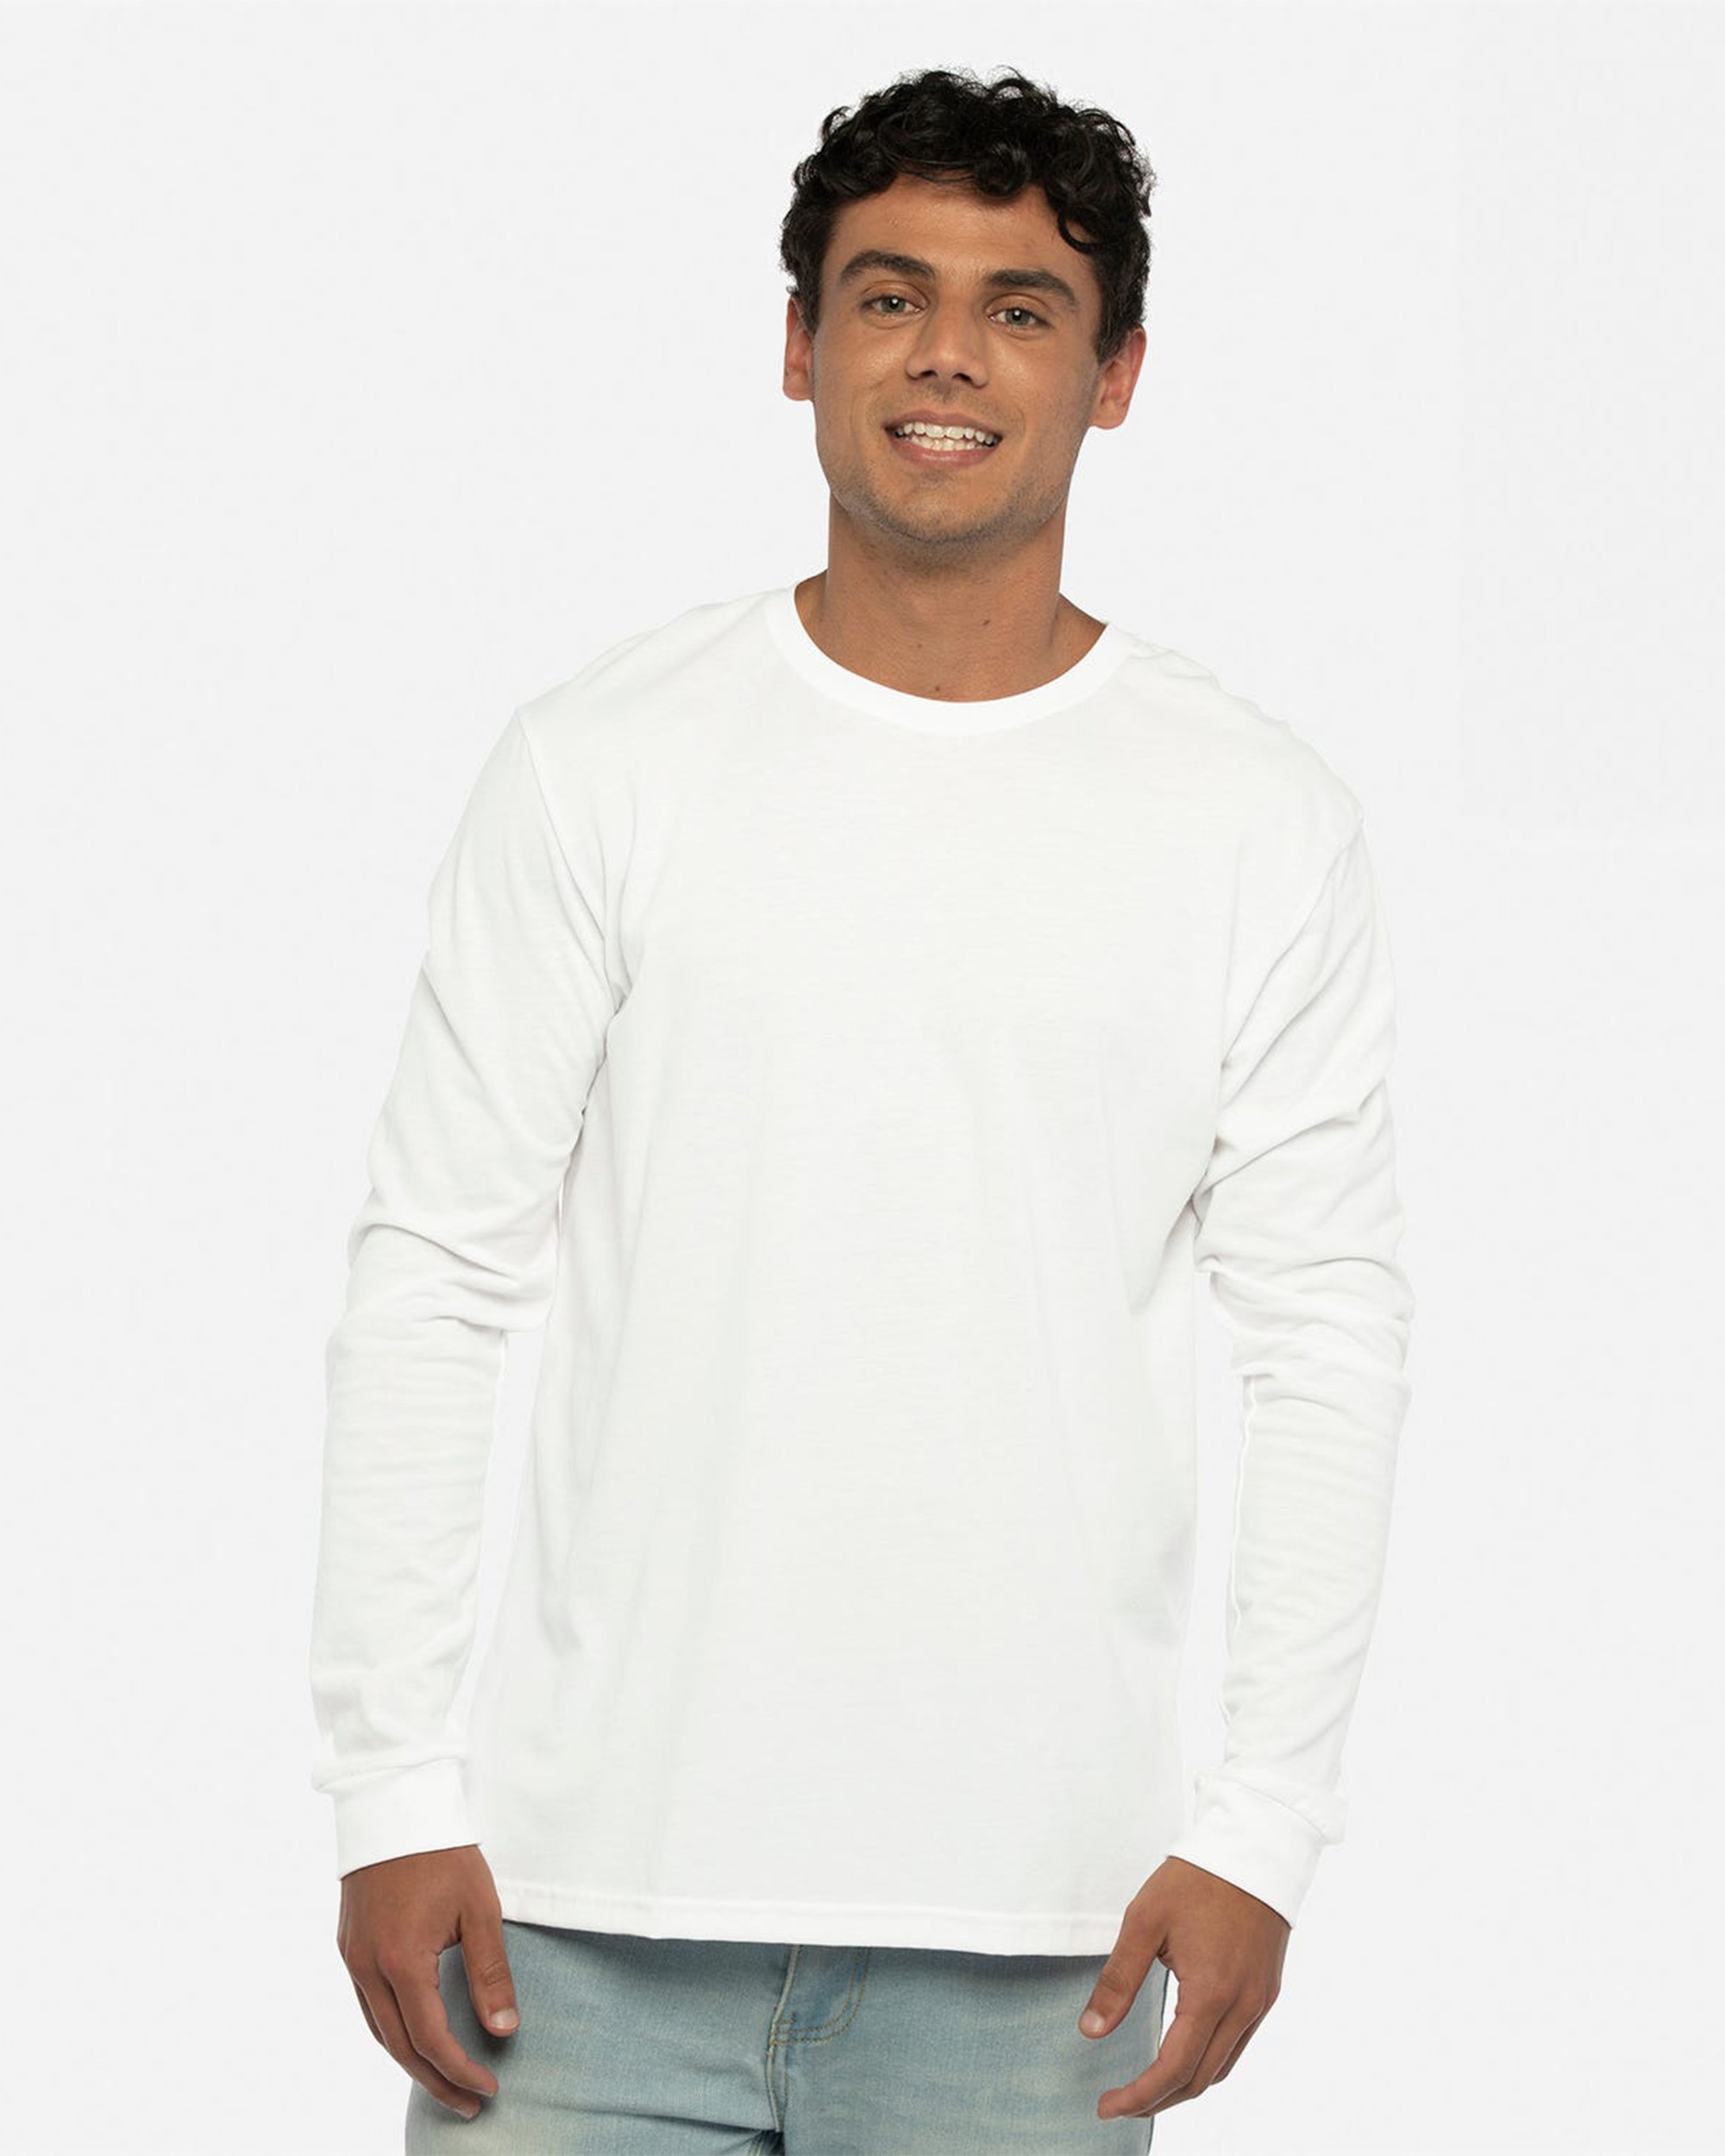 Next Level Apparel® 6411 Unisex Sueded Long Sleeve T-Shirt